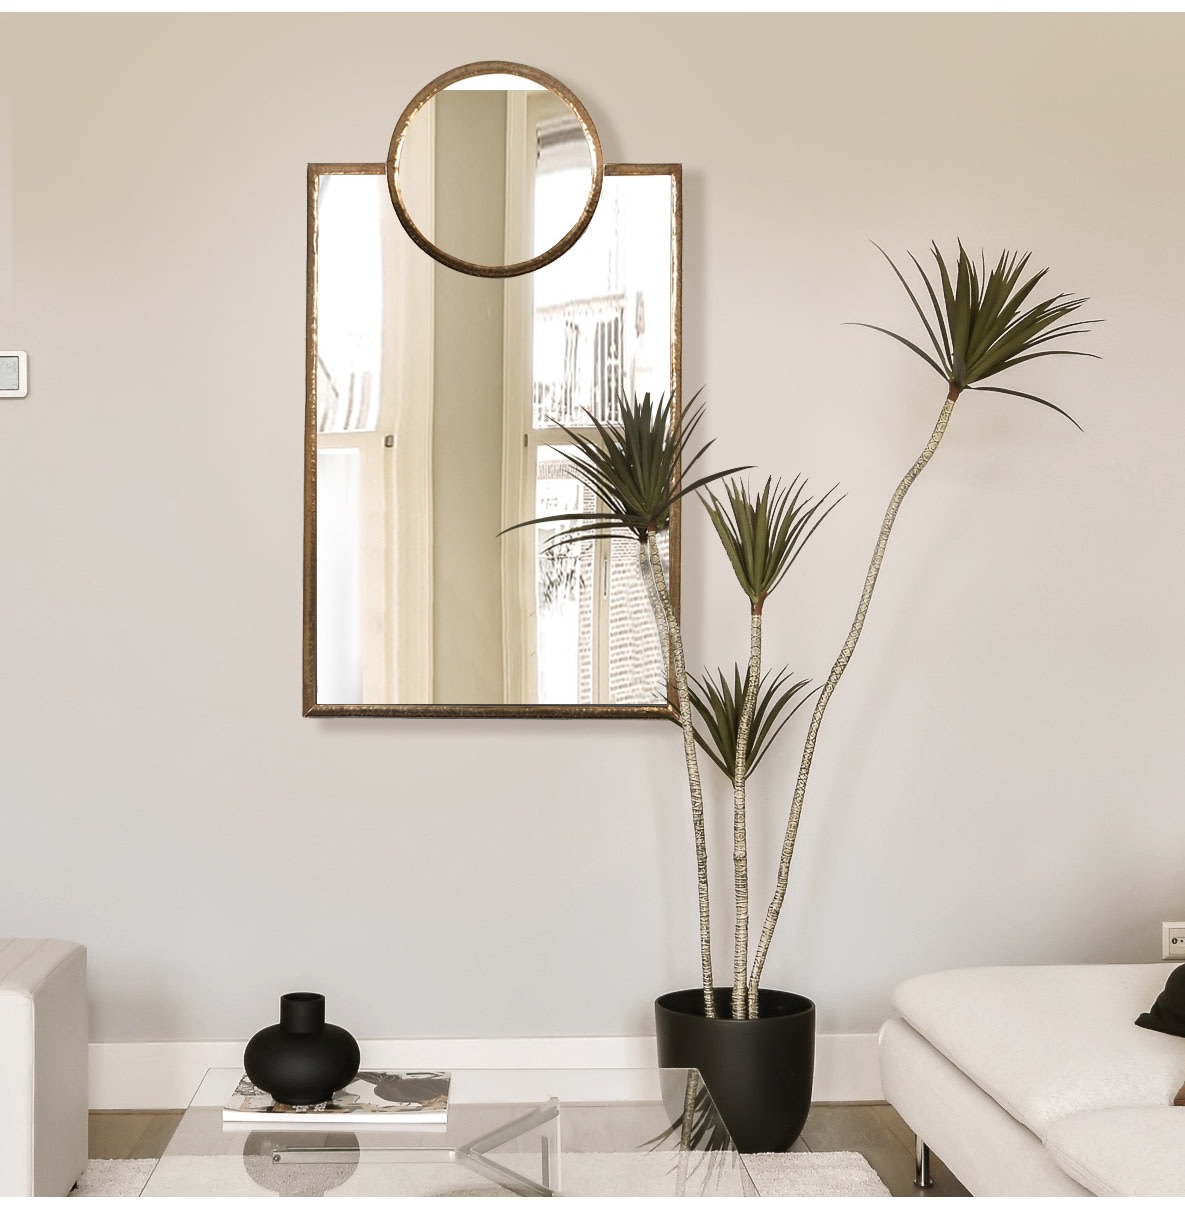 Inset Wall Mirrors